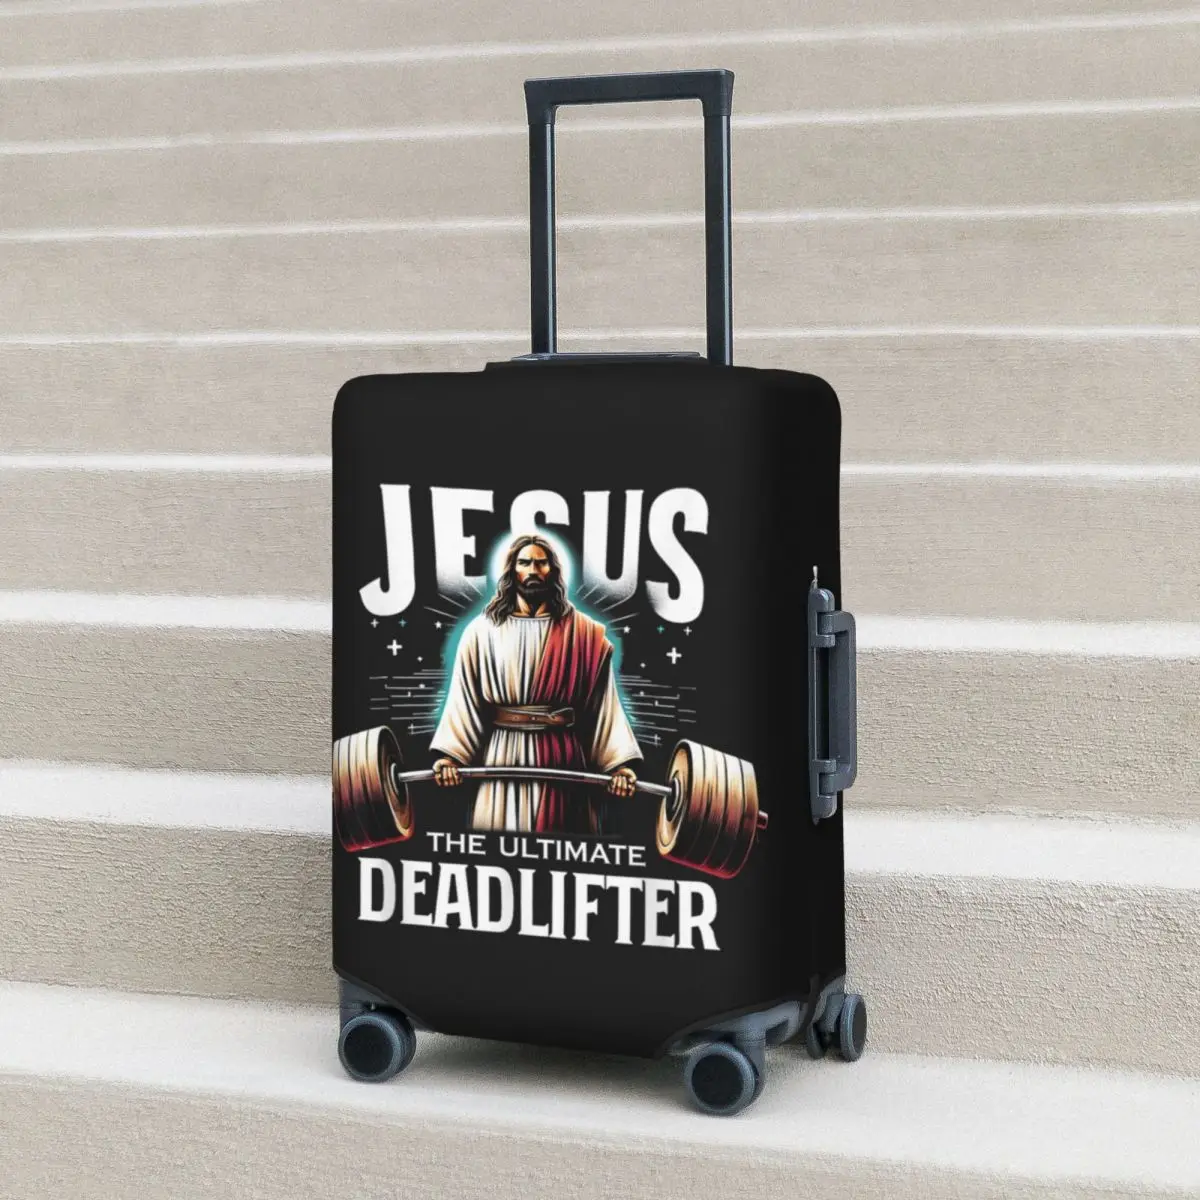 

Jesus The Ultimate Deadlifter Suitcase Cover Holiday Christian Jesus Fun Luggage Supplies Cruise Trip Protection